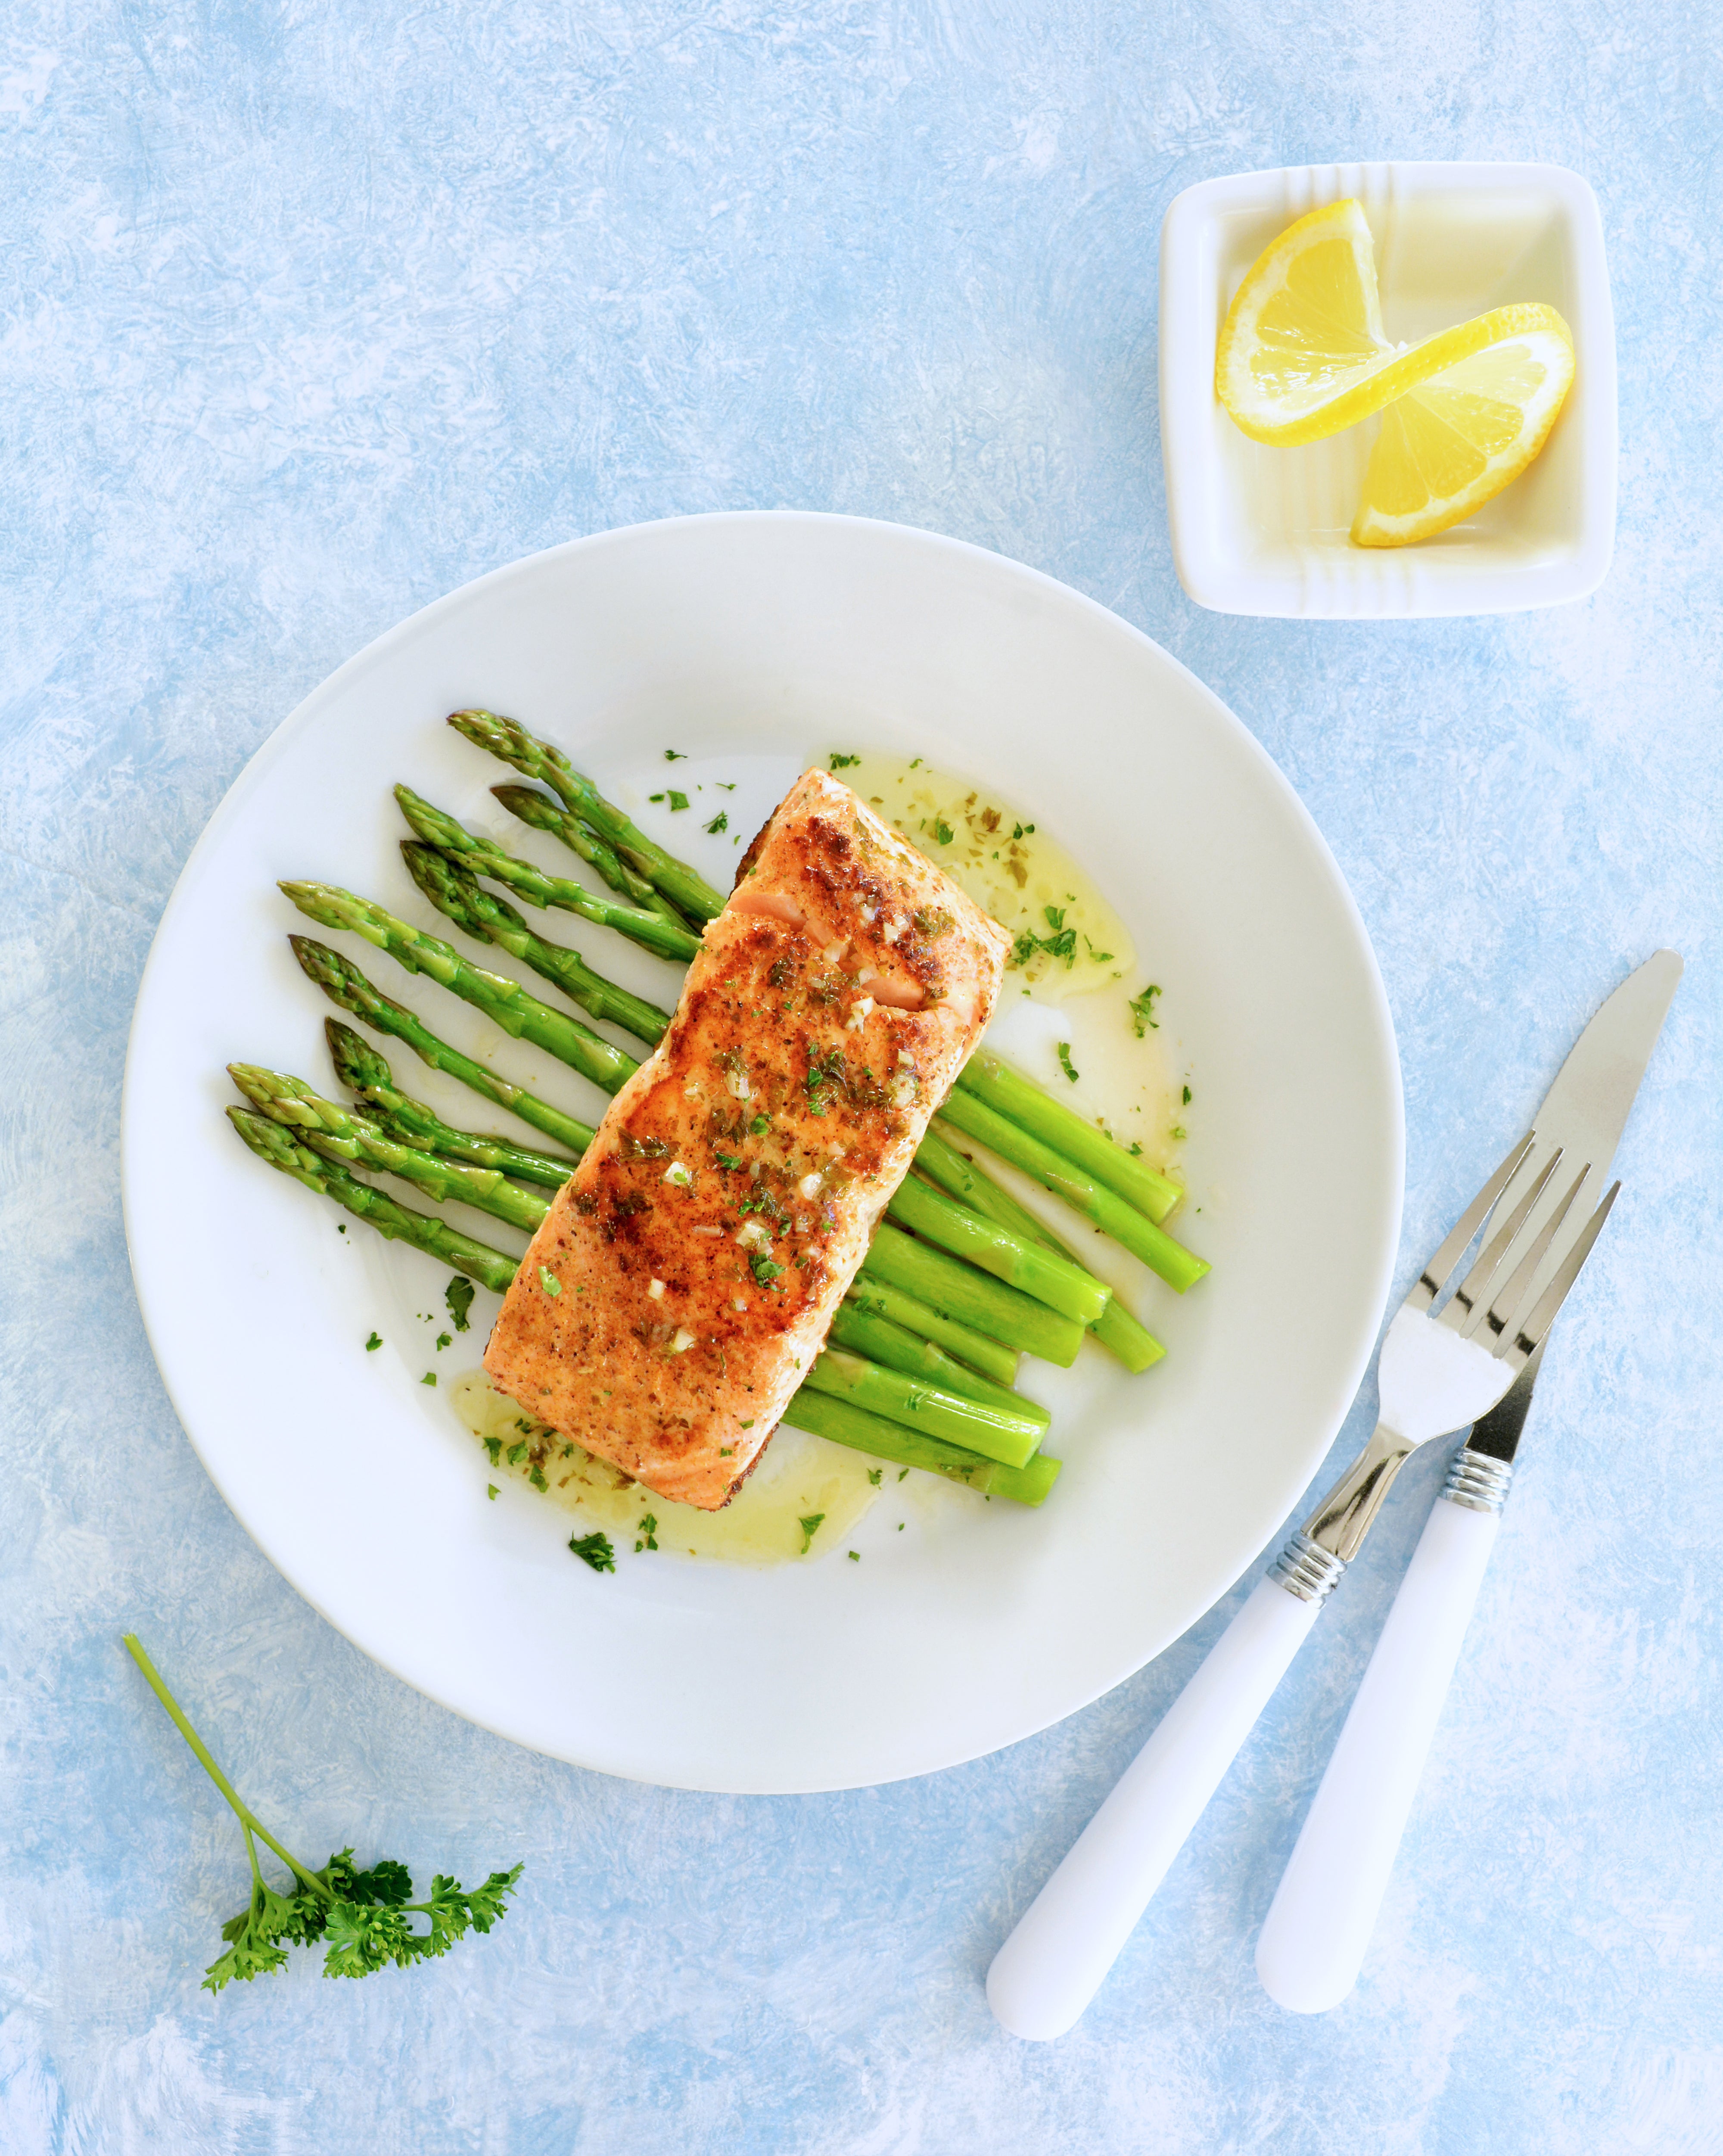 Grilling is a great method for perfectly cooking salmon